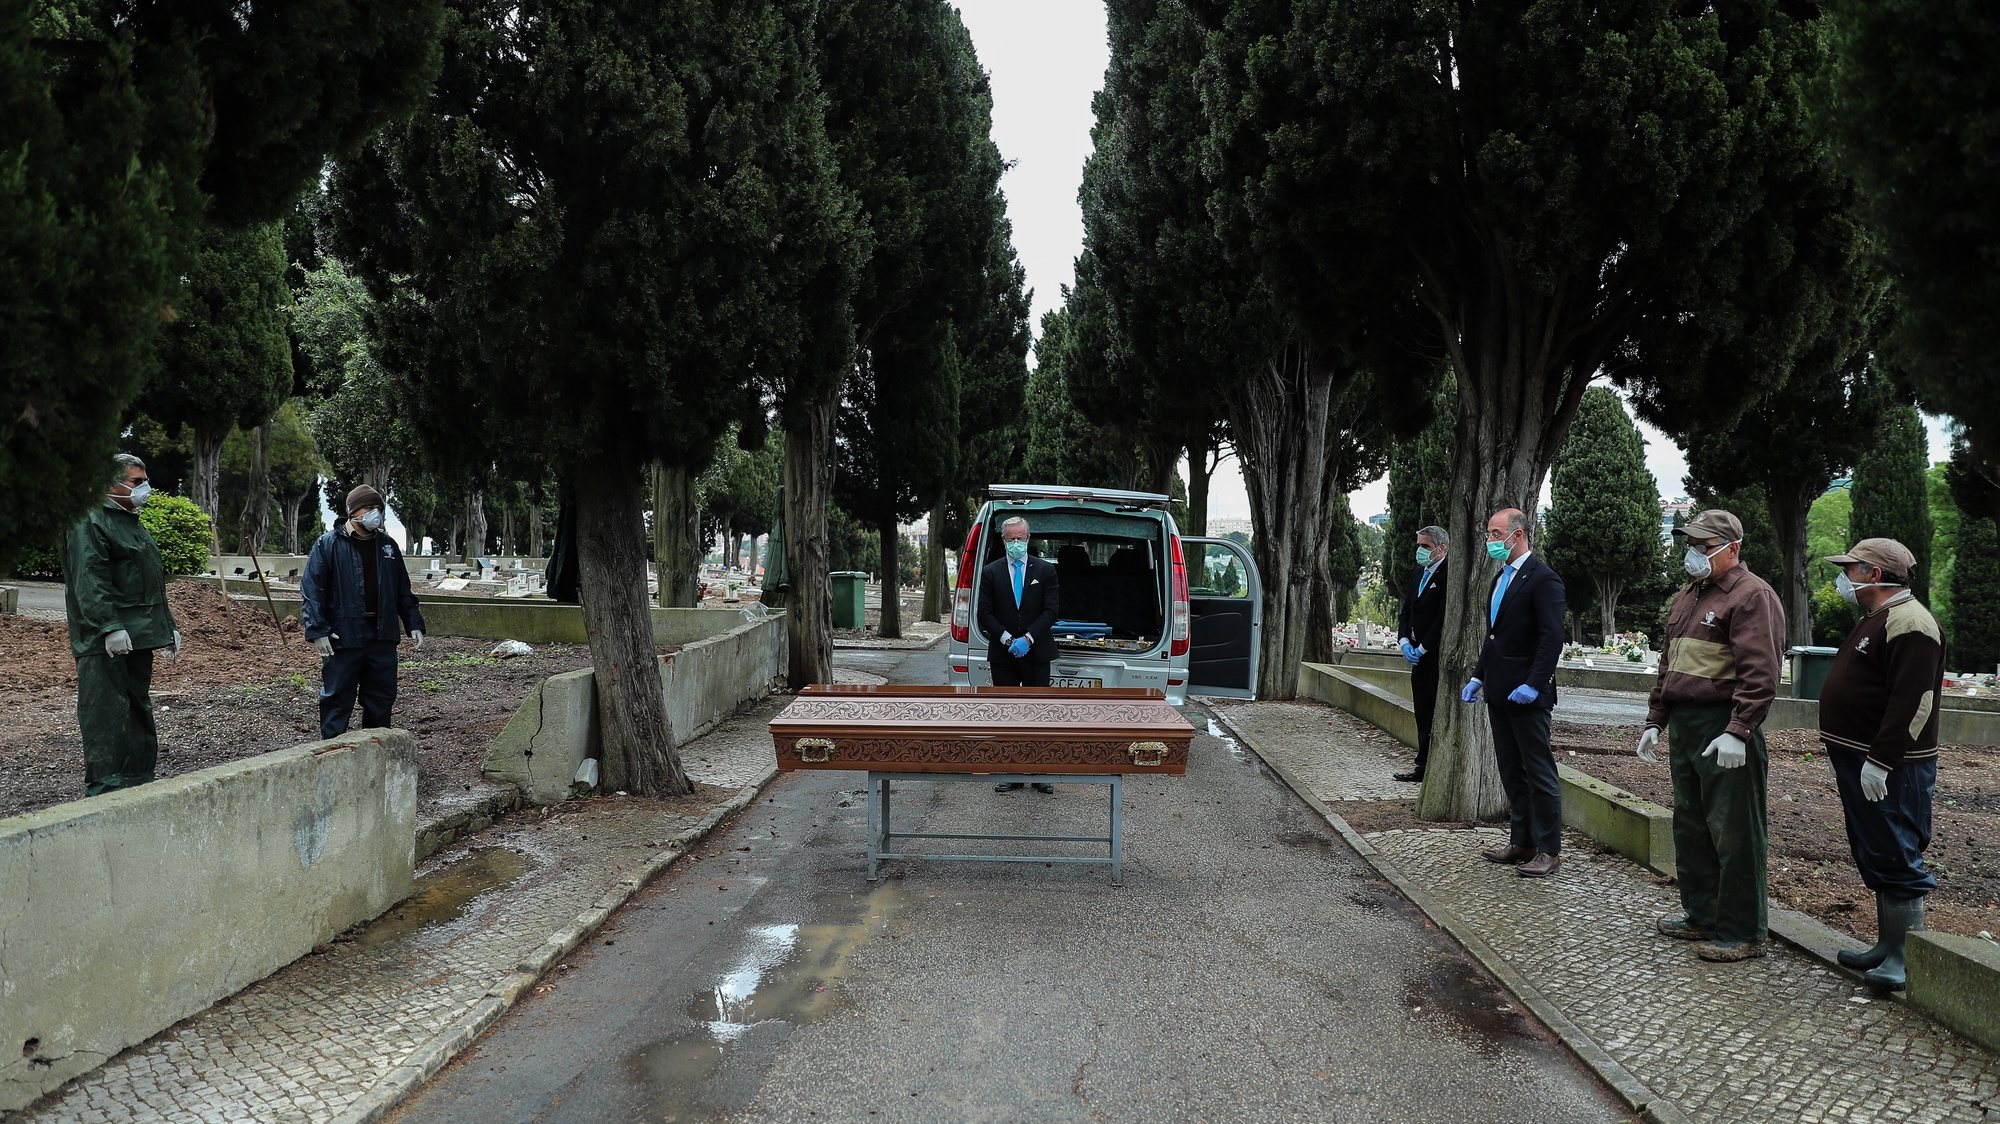 epa08347884 Employees of a funeral home and gravediggers at Benfica cemetery wearing protective masks pay respect to a woman about 30 years old who died of cancer, during the funeral ceremony, in Lisbon, Portugal, 01 April 2020 (Issued 07 April 2020). Portugal is in state of emergency until 17 April 2020. Countries around the world are taking increased measures to stem the widespread of the SARS-CoV-2 coronavirus which causes the Covid-19 disease.  EPA/MIGUEL A. LOPES  ATTENTION: This Image is part of a PHOTO SET